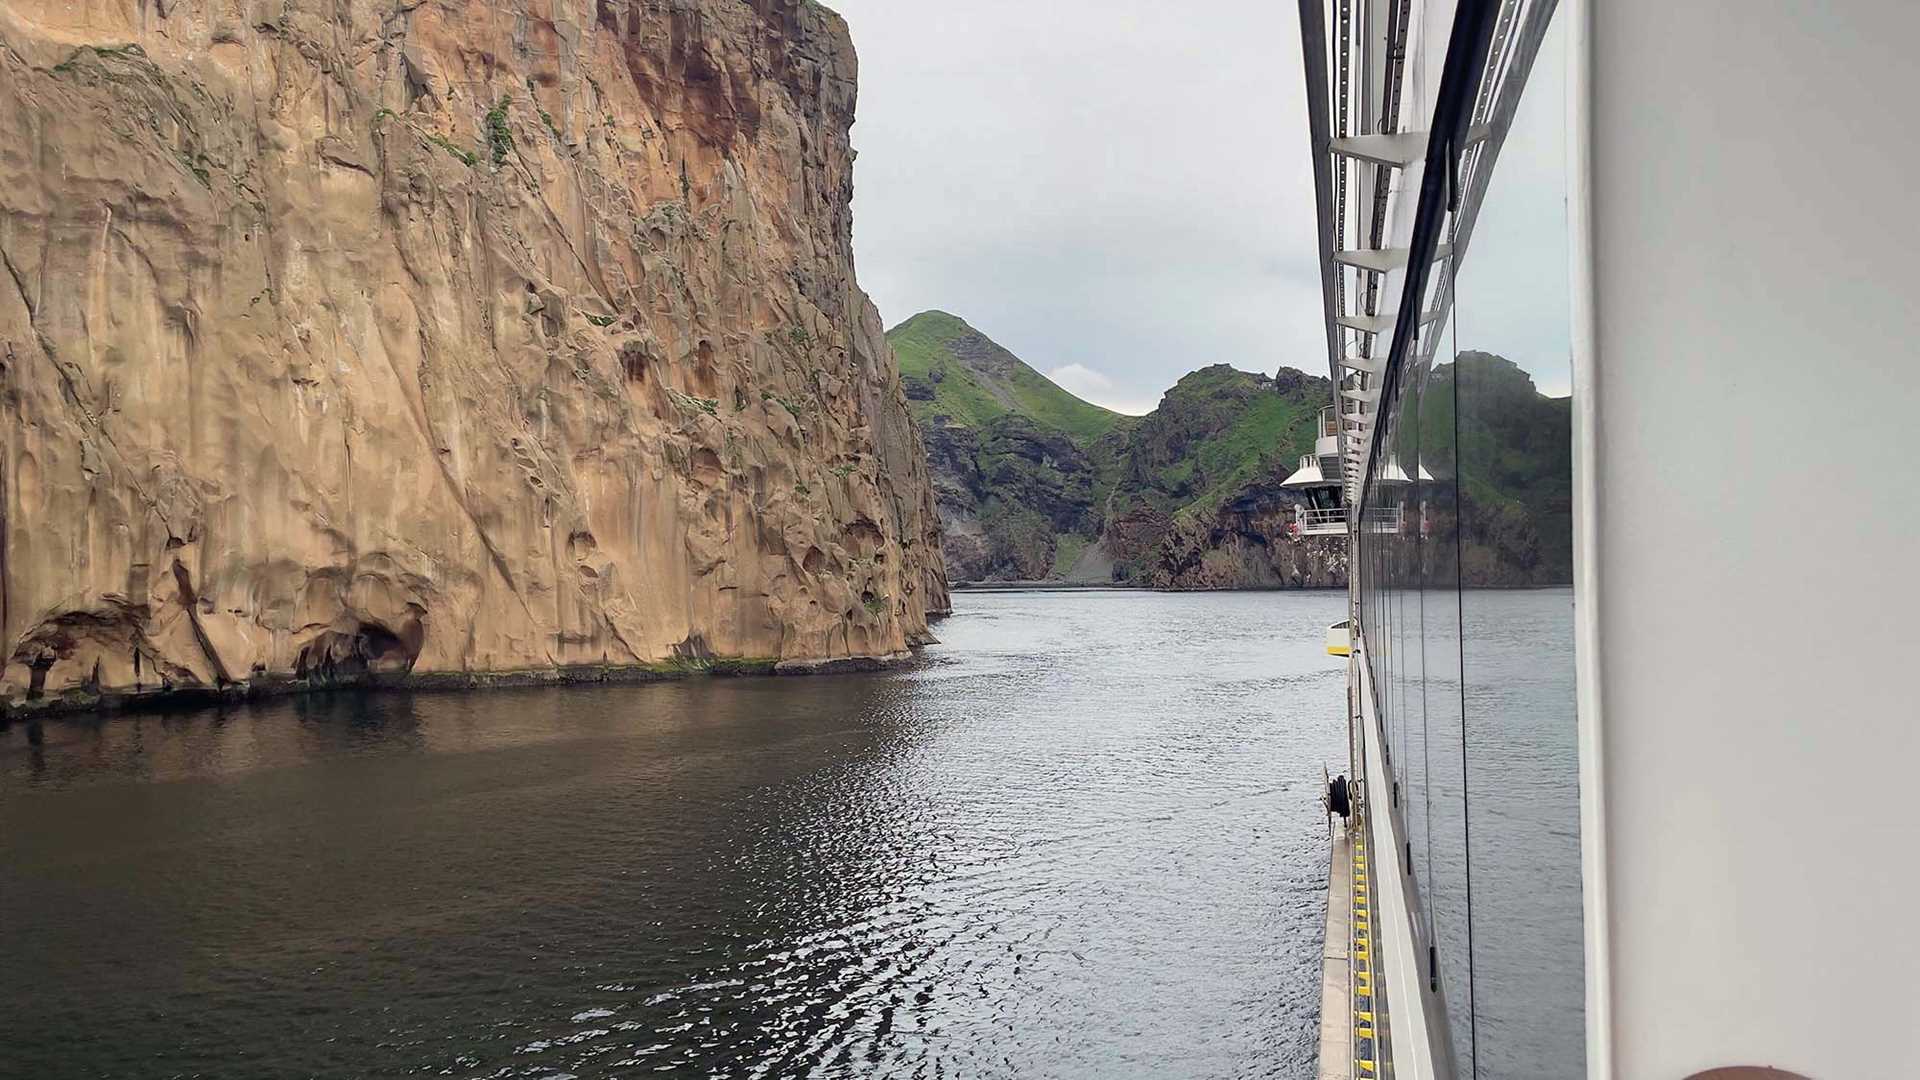 national geographic resolution deck in a very narrow harbor